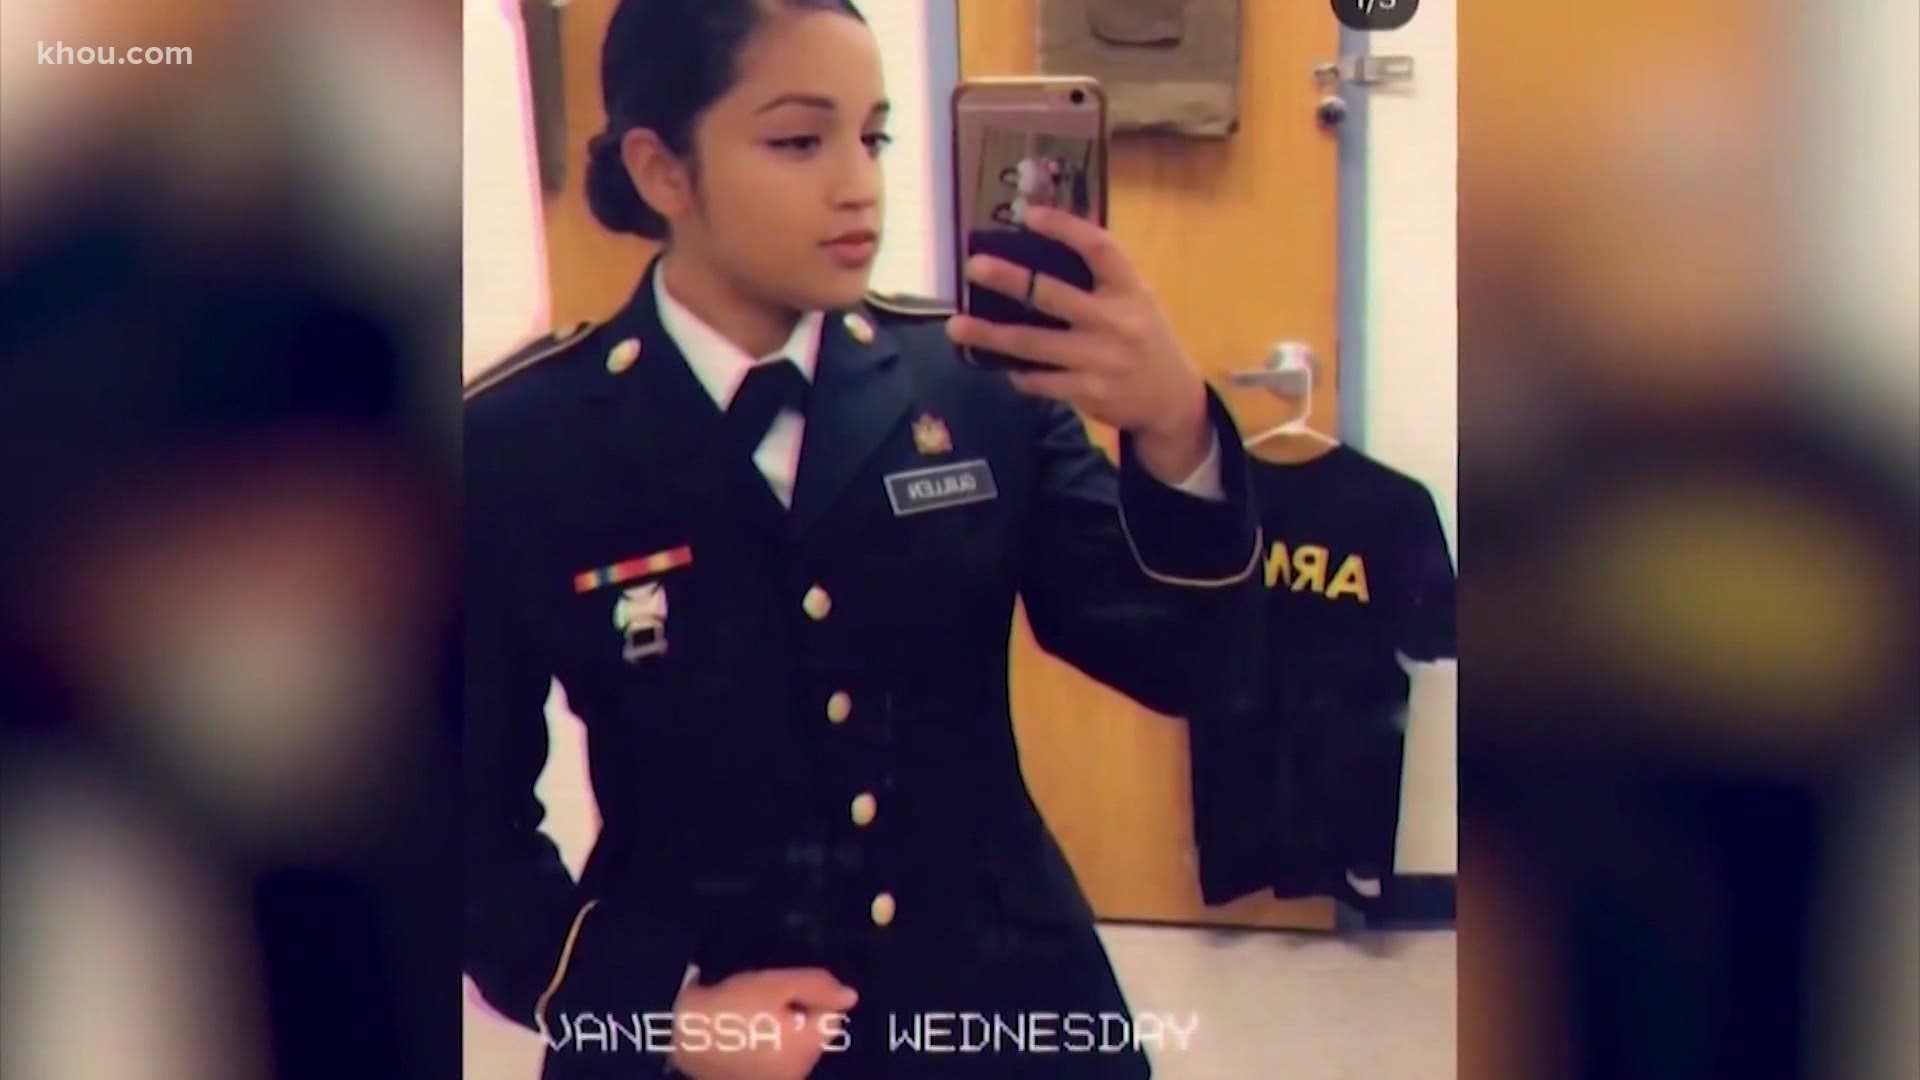 The Guillen family pleading for a congressional investigation after remains found are believed to be those of missing Fort Hood soldier Vanessa Guillen.